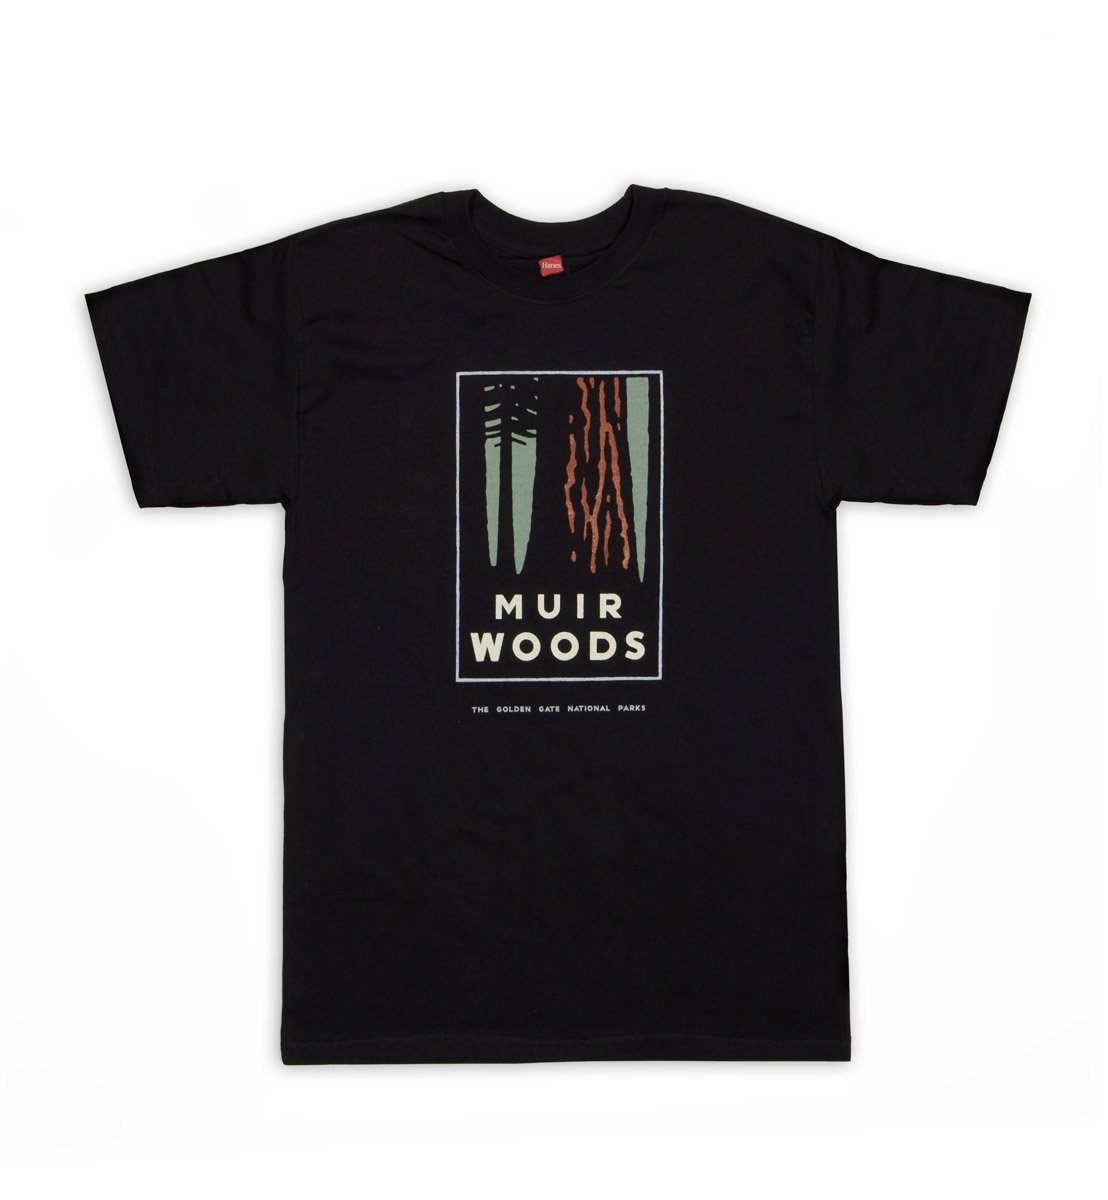 Black graphic t-shirt with colorful screen-printed design of Muir Woods on chest. Artwork by Michael Schwab.